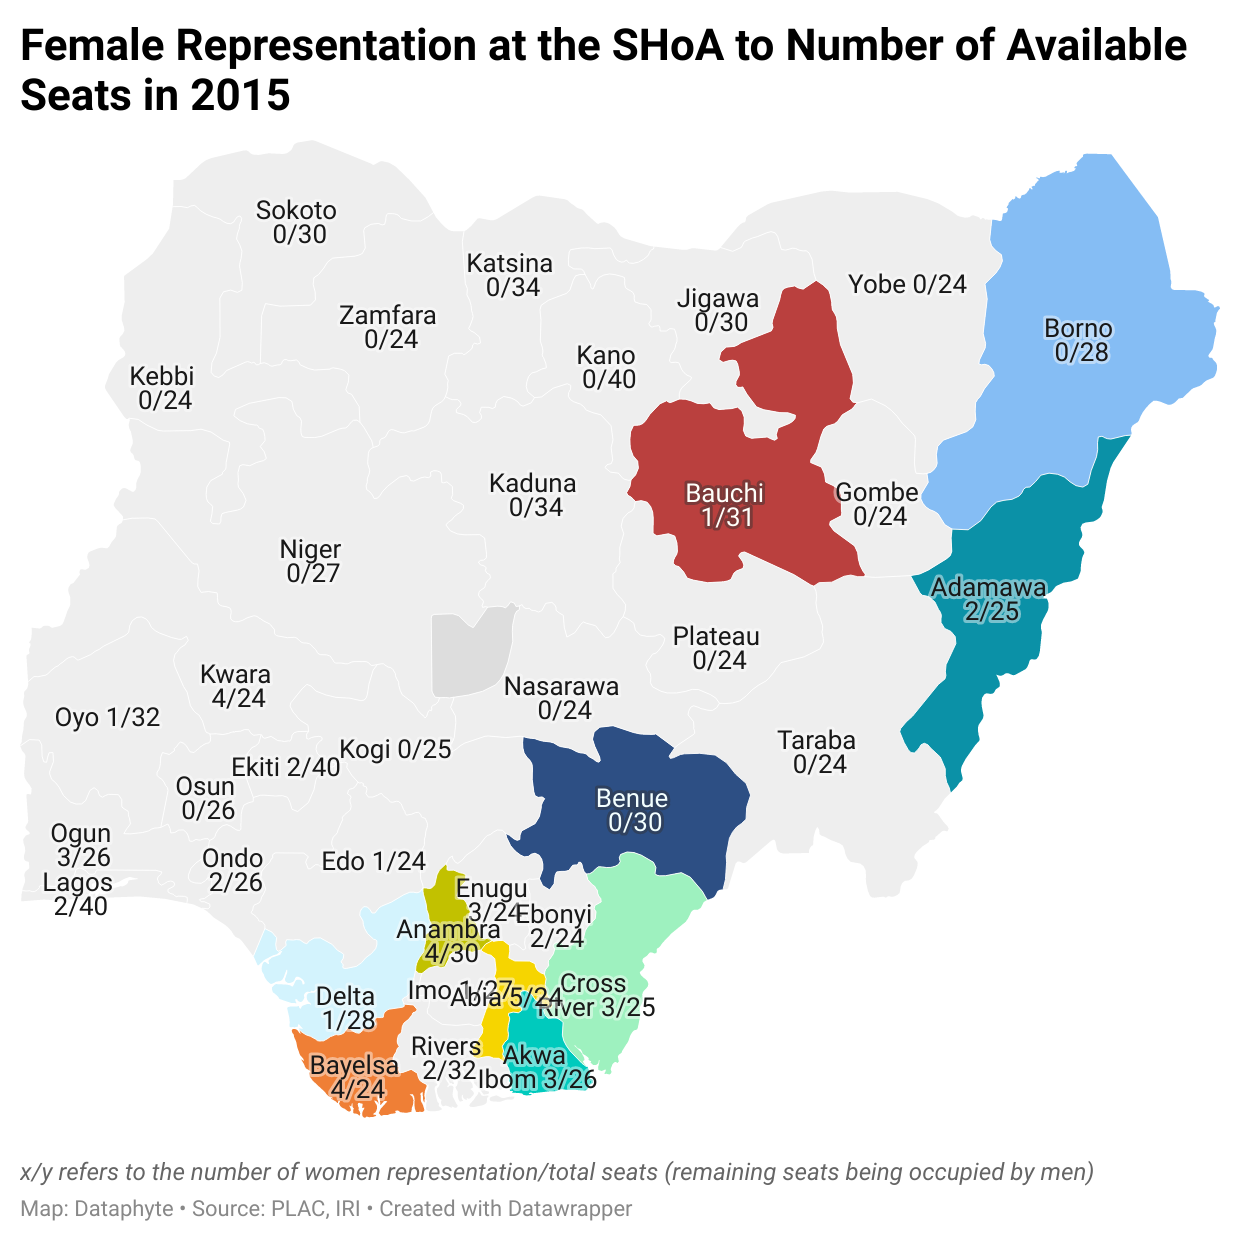 2023 Elections: With Only 4.5% State Representation in 2019, How can Female Representation Improve?